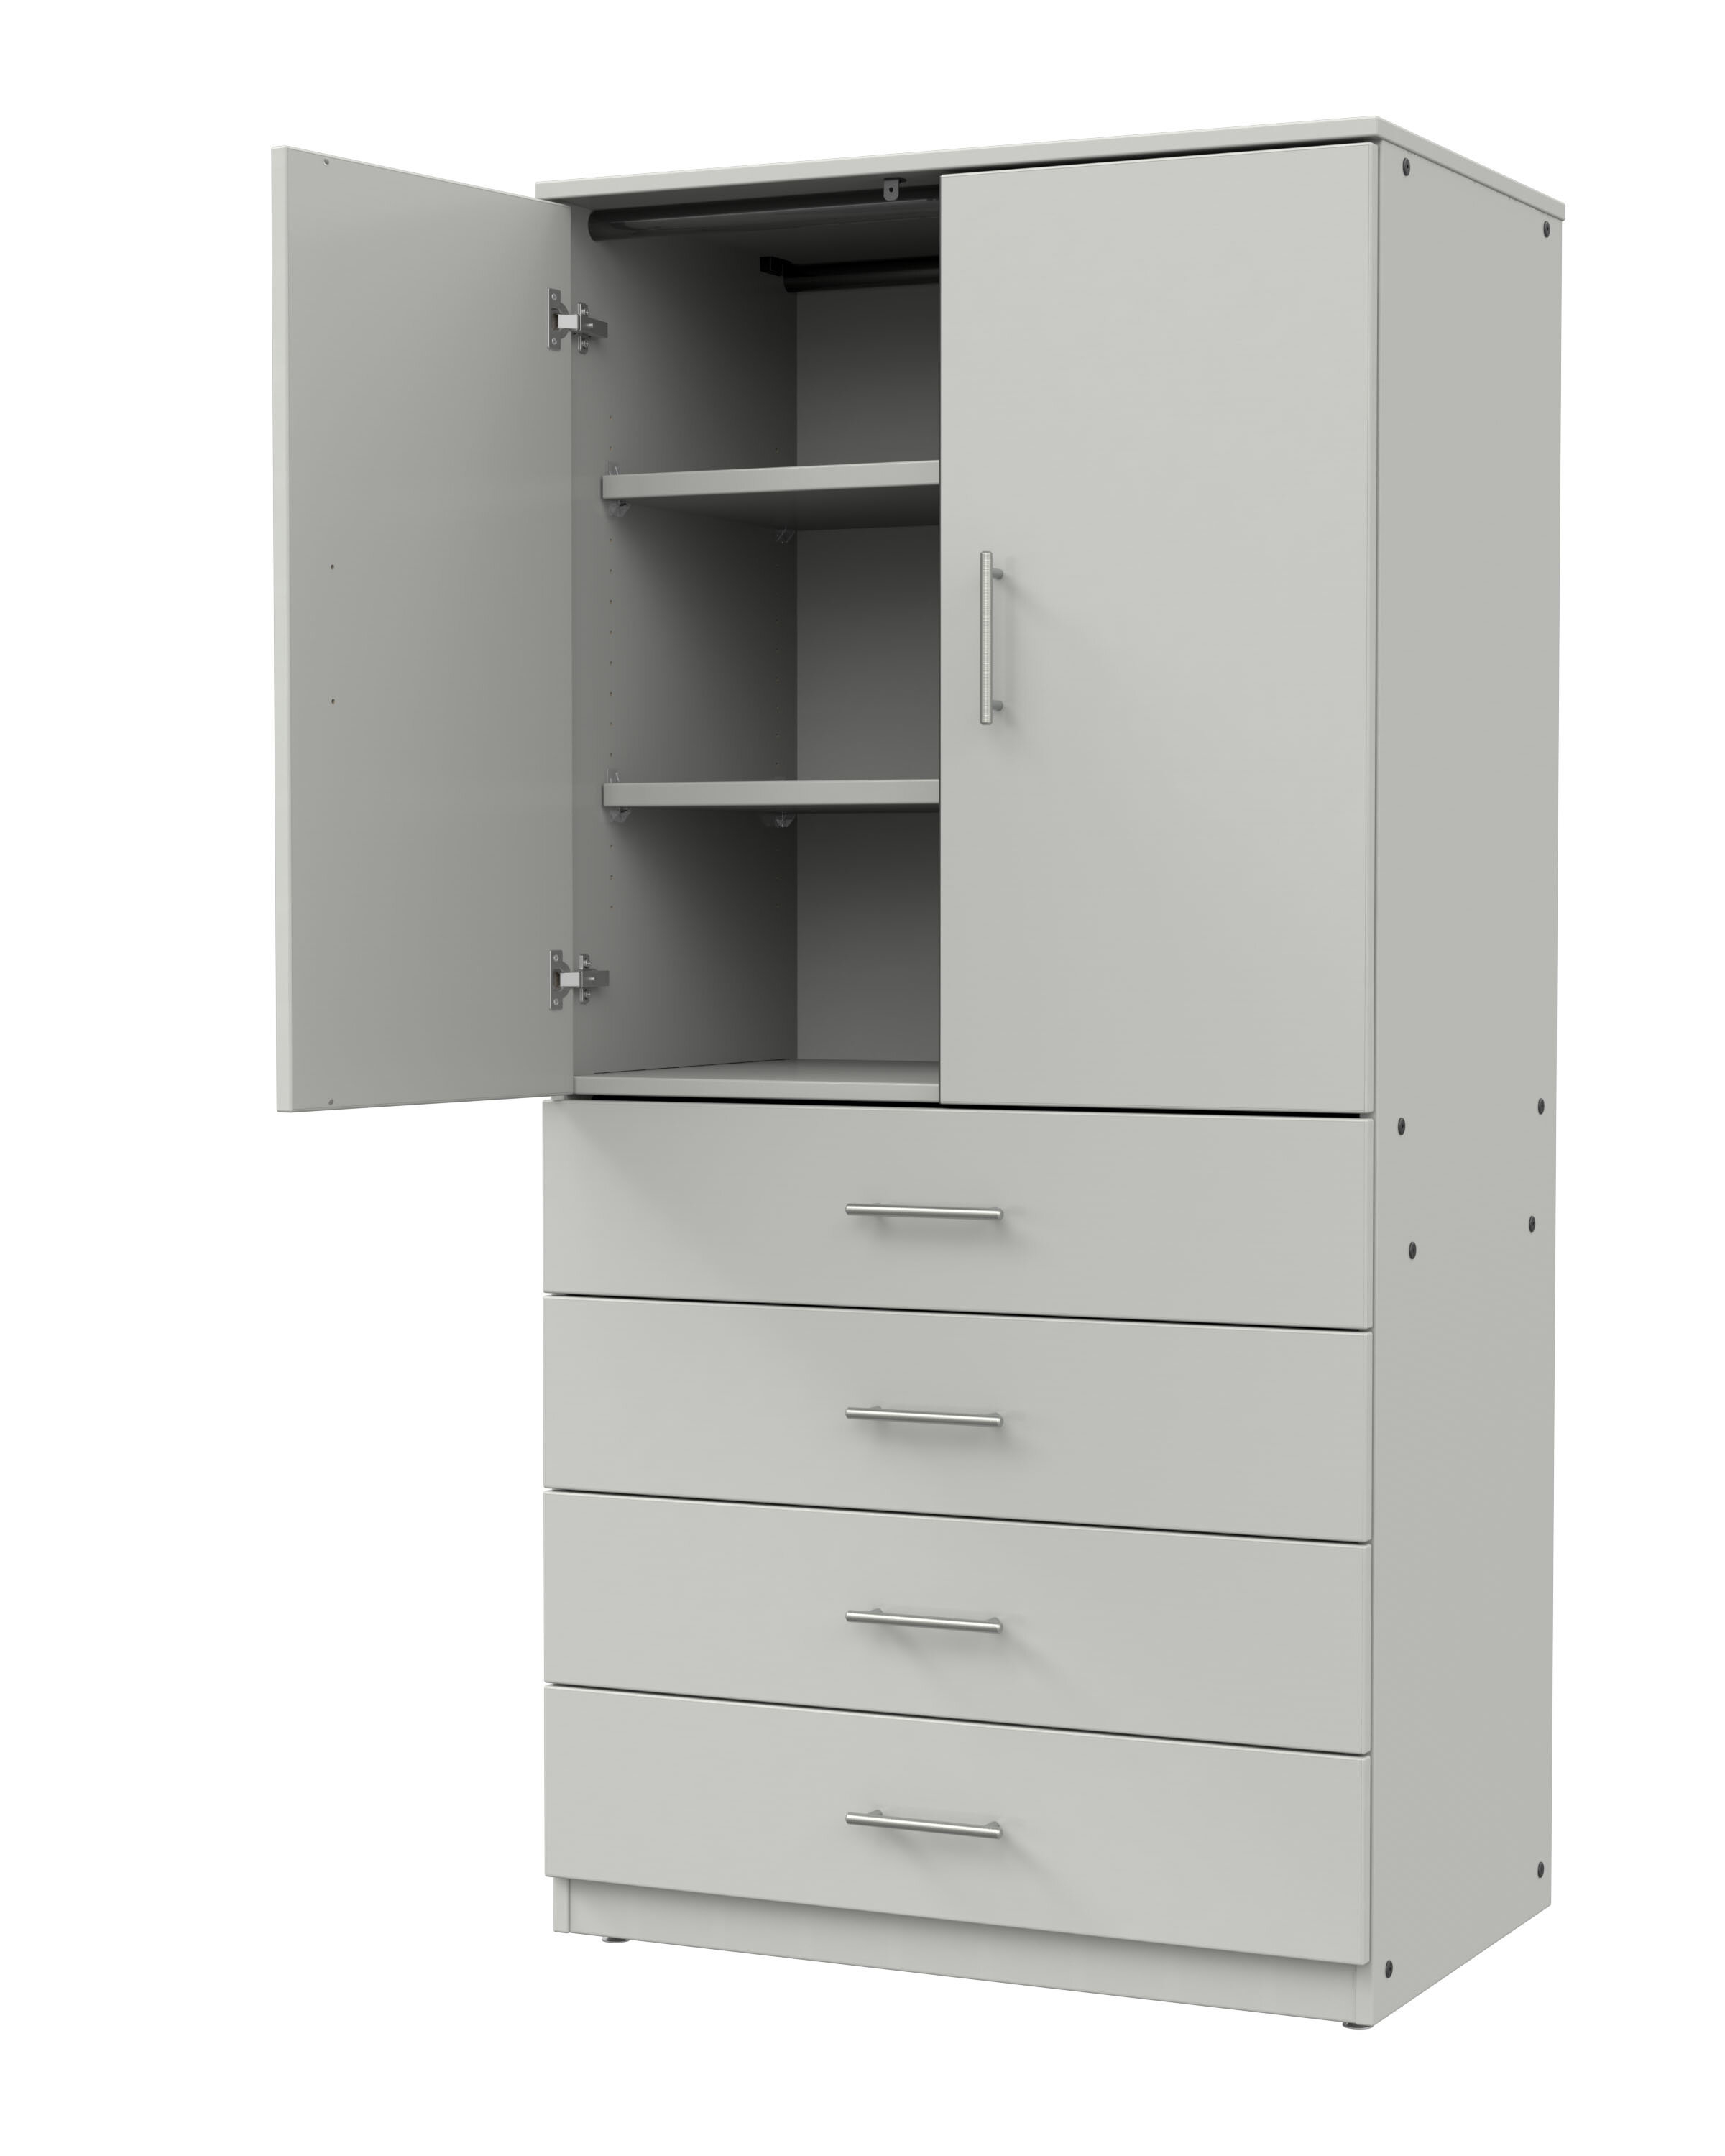 Tall Wood Storage Cabinets With Doors, Tall Storage Cabinet With Drawers And Shelves